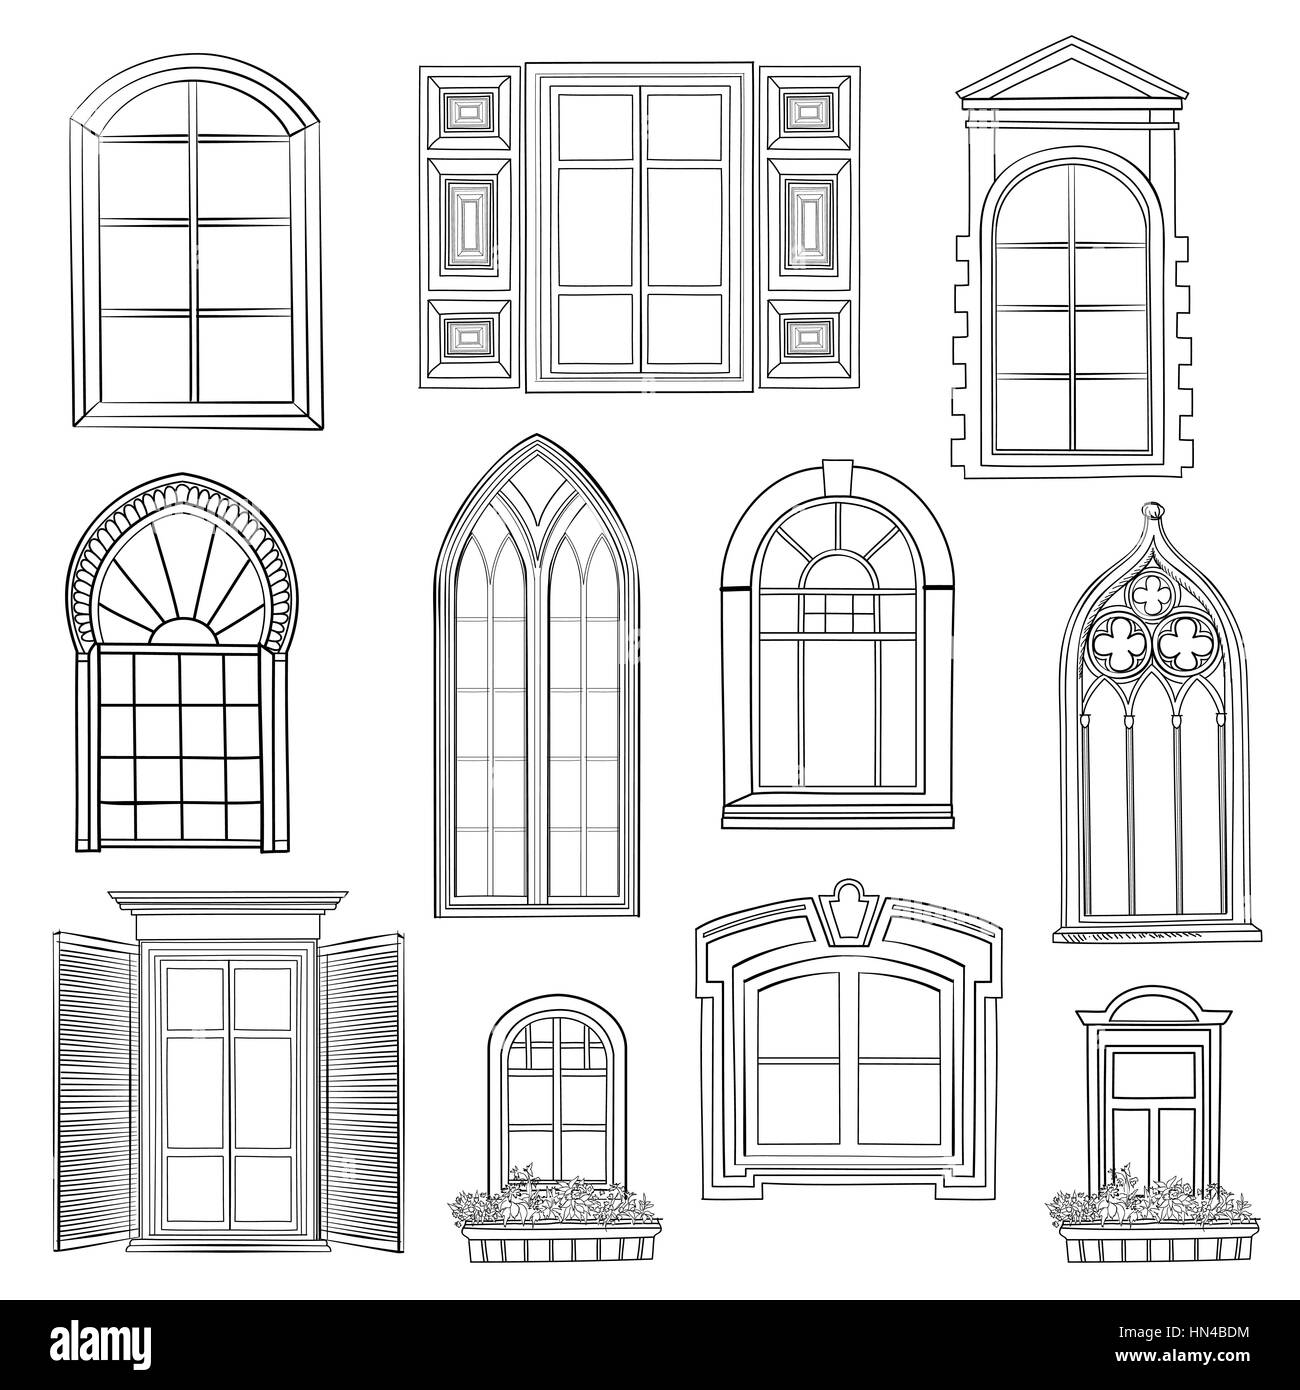 Window set. Different architectural style of windows doodle sketch stylish collection Stock Vector